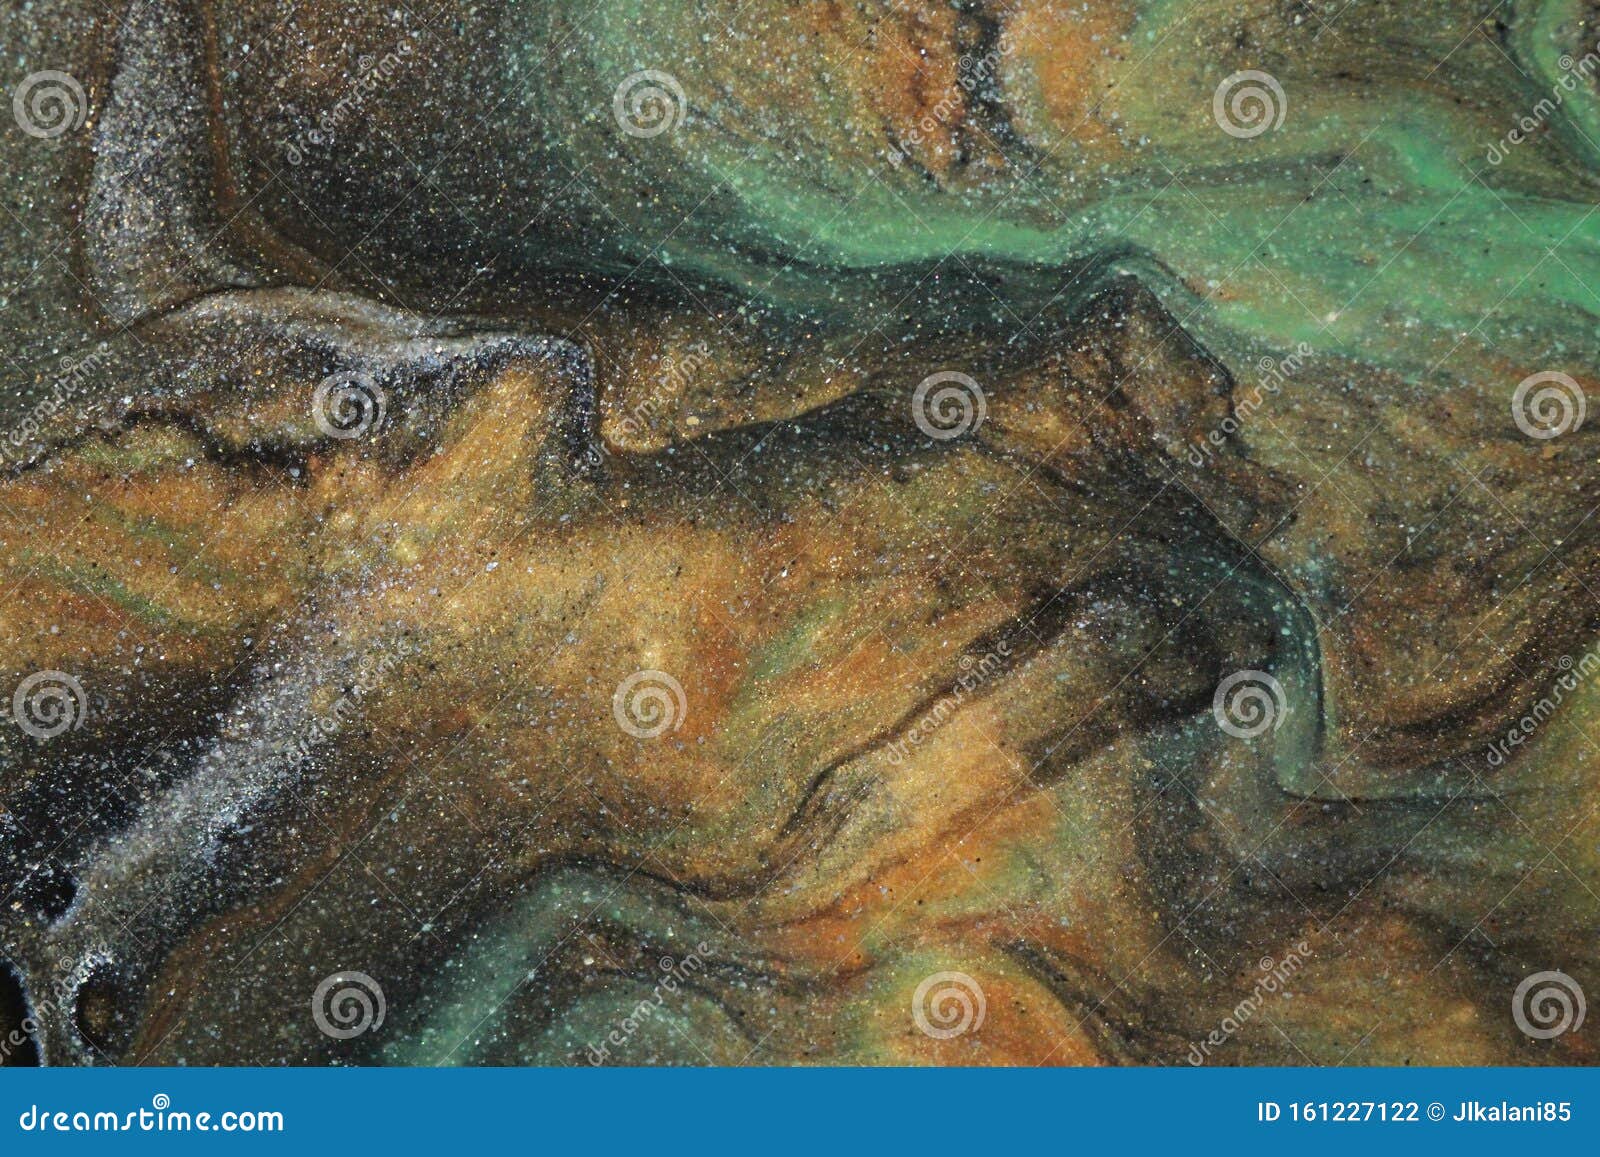 Earth Tones Blend Together To Create An Abstract Background That Resembles An Ancient Cave Painting Stock Photo Image Of Earth Canvas 161227122